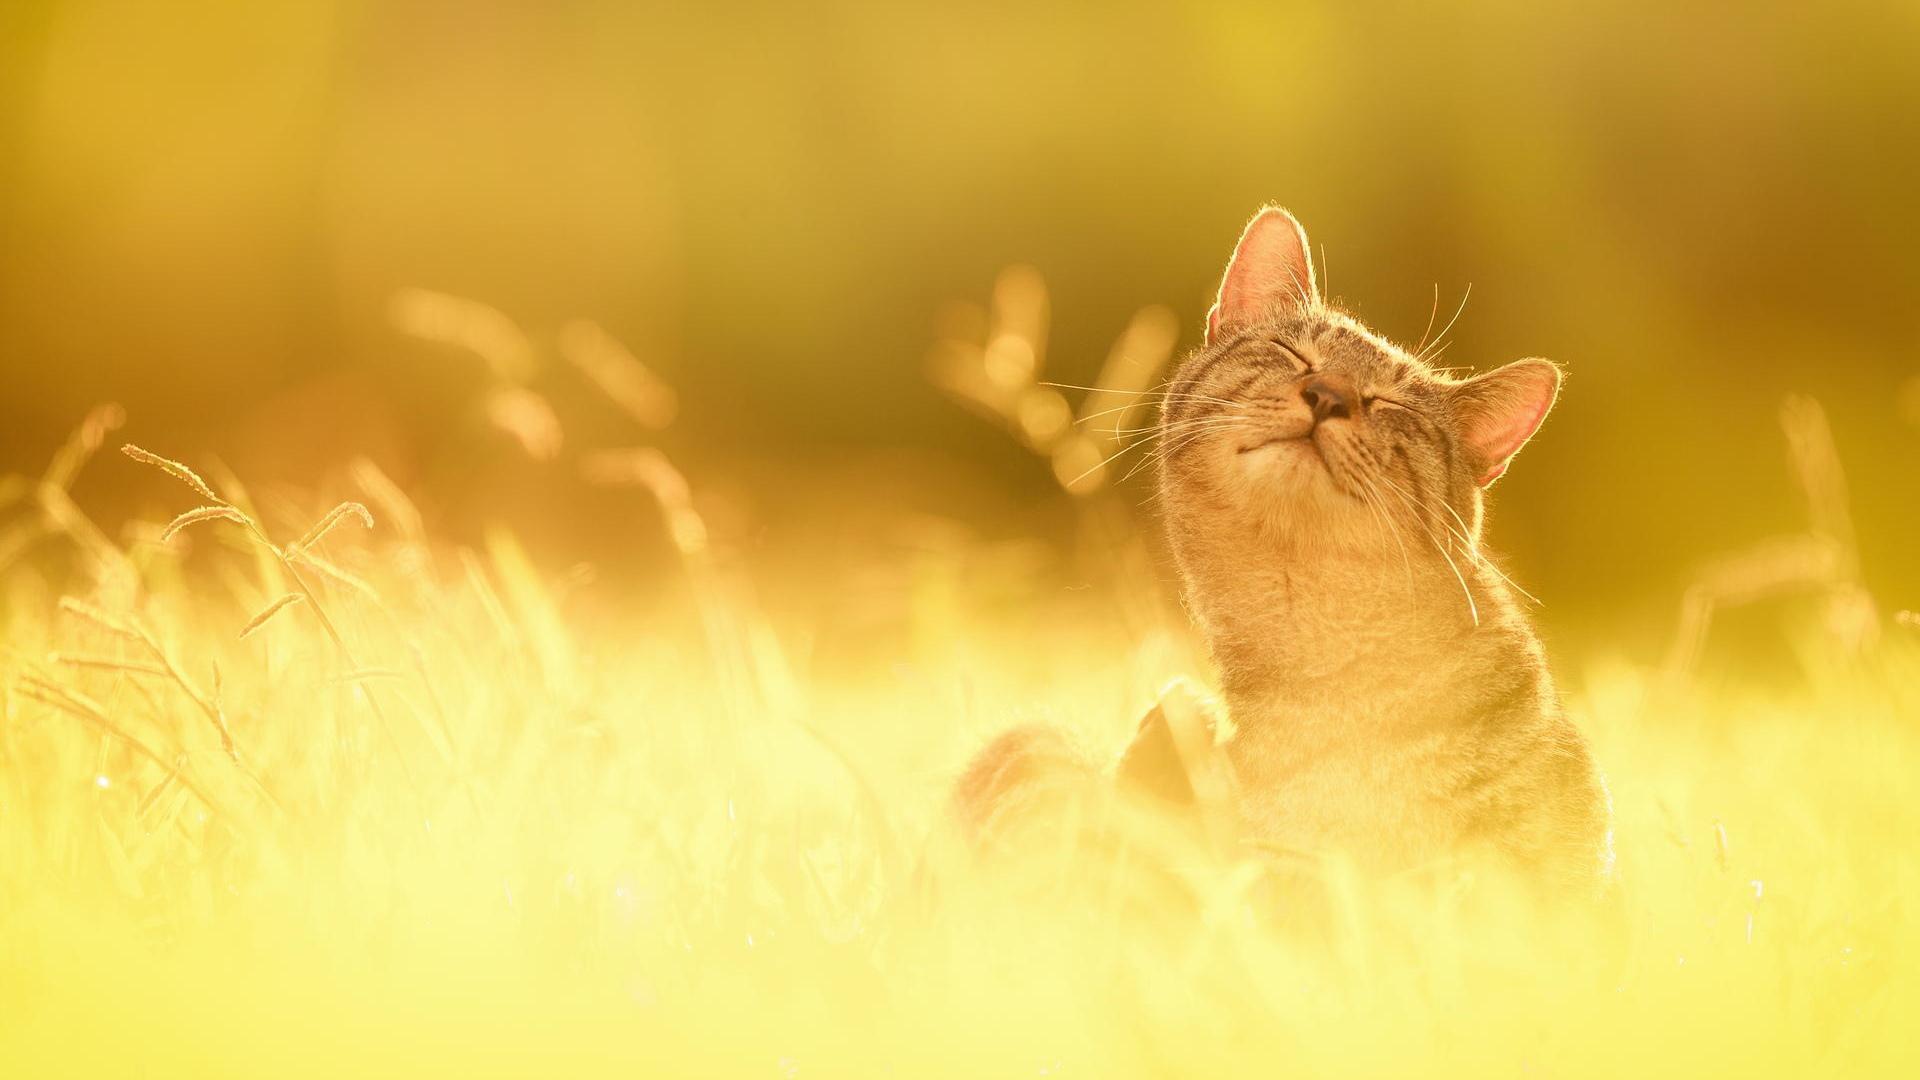 cat in sunny day - (#110027) - High Quality and Resolution ...